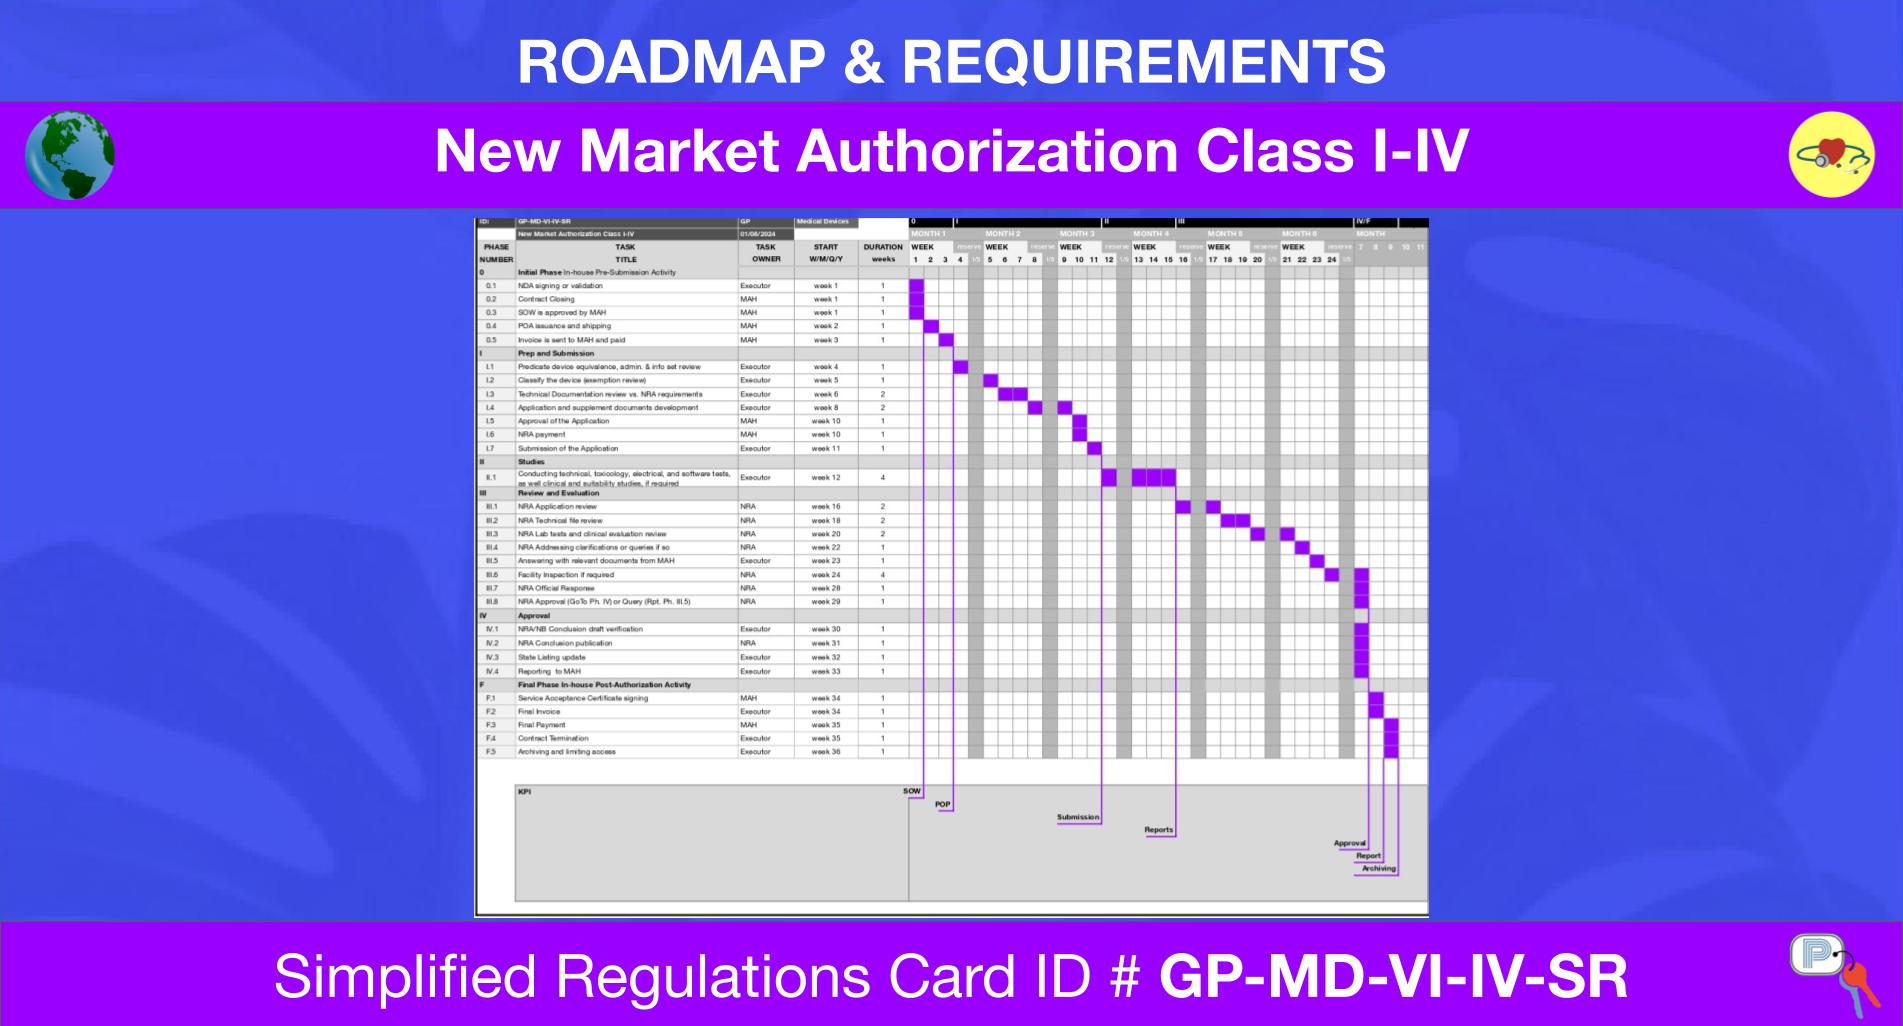 Gp Medical Devices New Market Authorization Class I Iv Simplified Regulations Card (1)